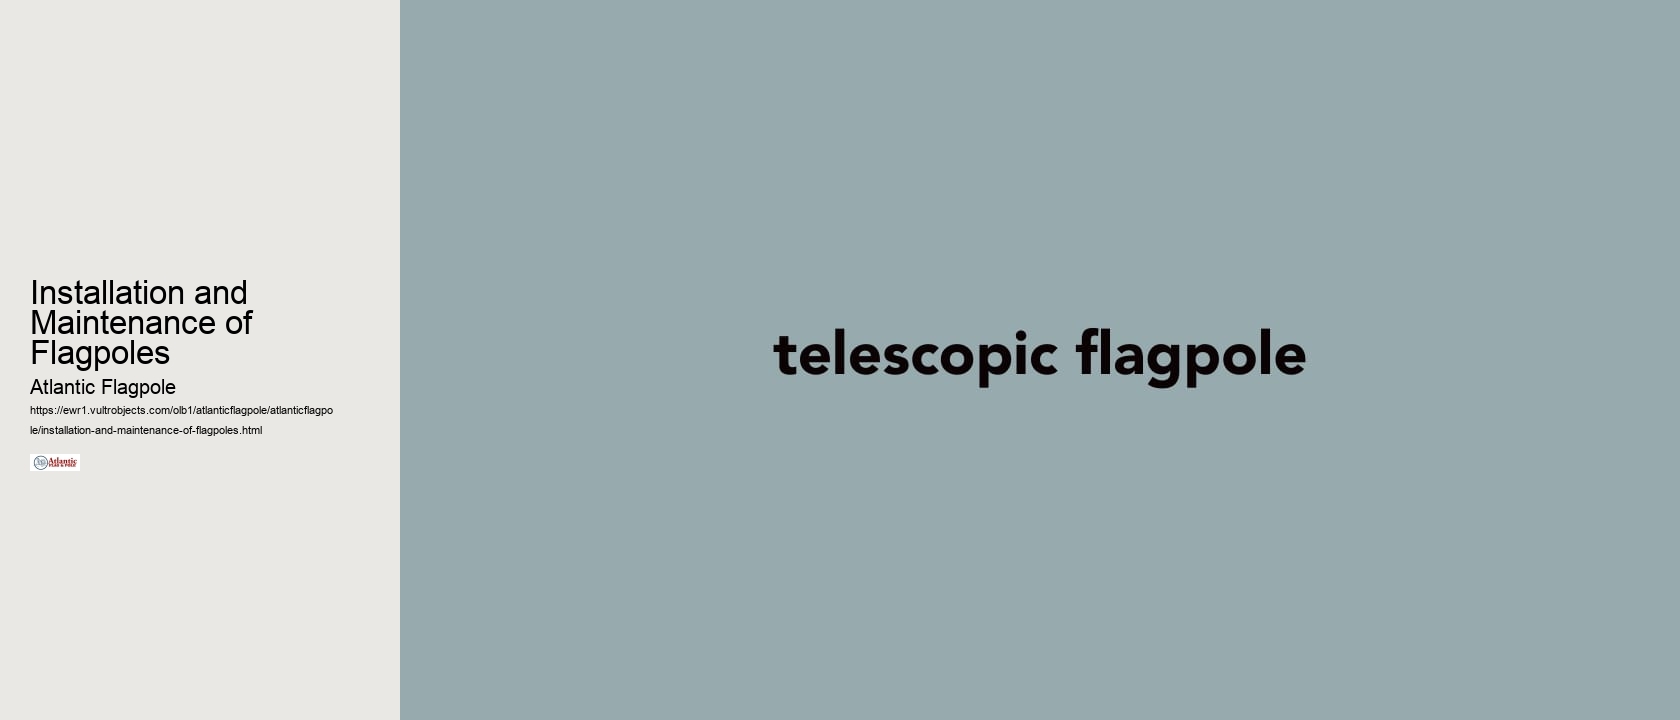 Installation and Maintenance of Flagpoles